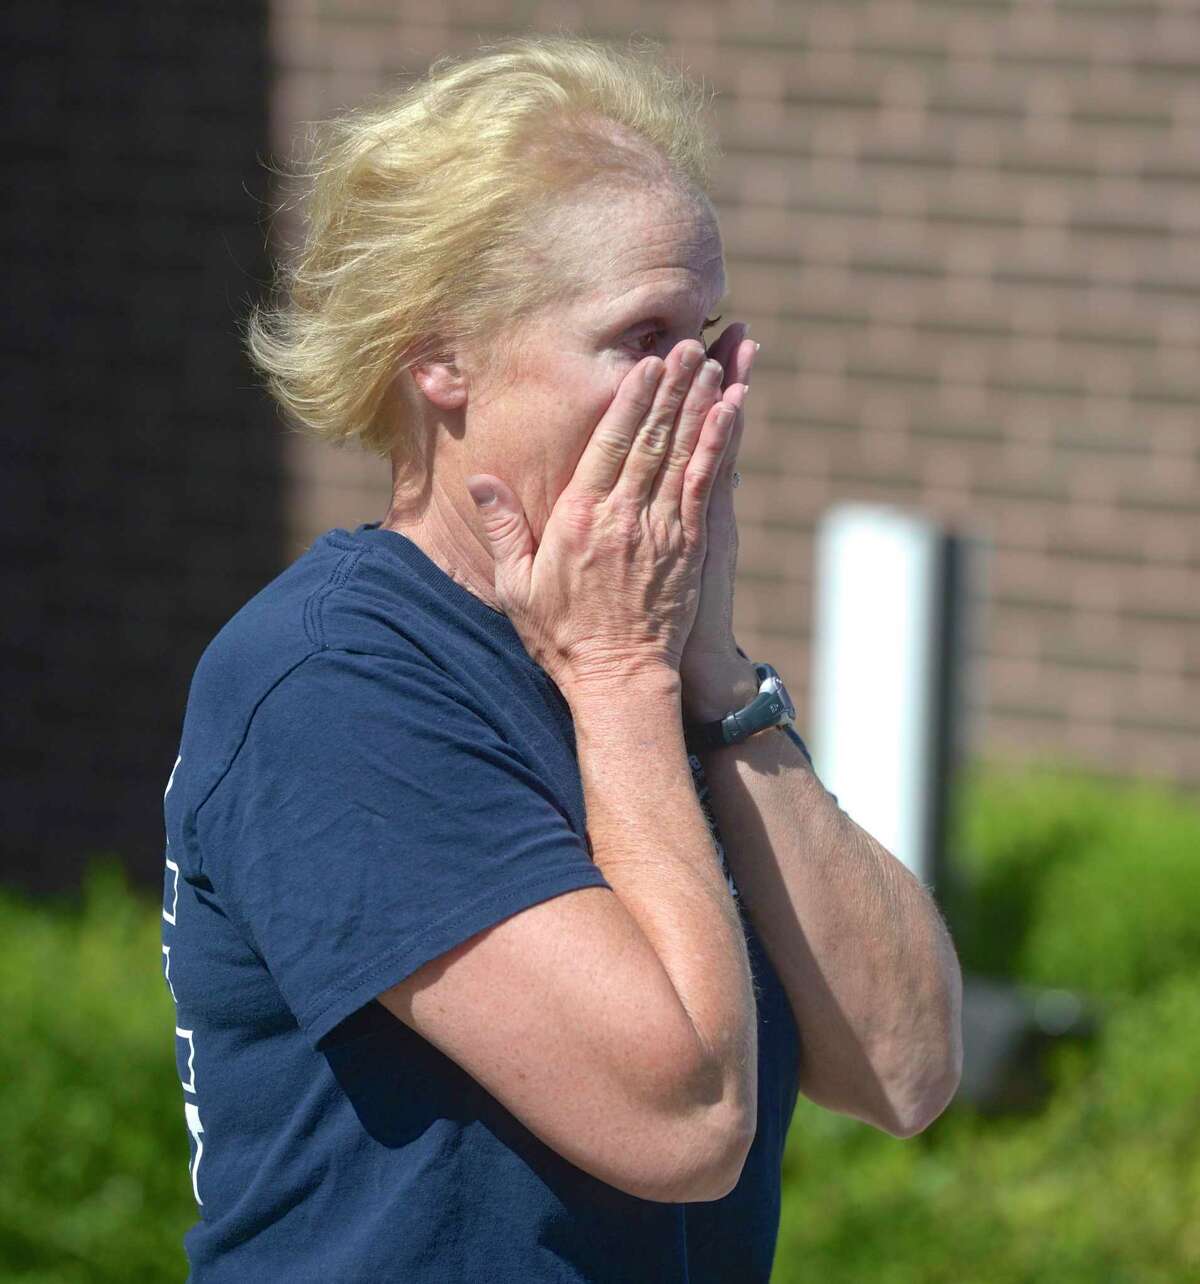 Lieutenant Lorinda Arconti wipes away tears during a flag ceremony to mark her retirement after 32 years with the Danbury Fire Department. Arconti was the first female firefighter and the first female Lieutenant.